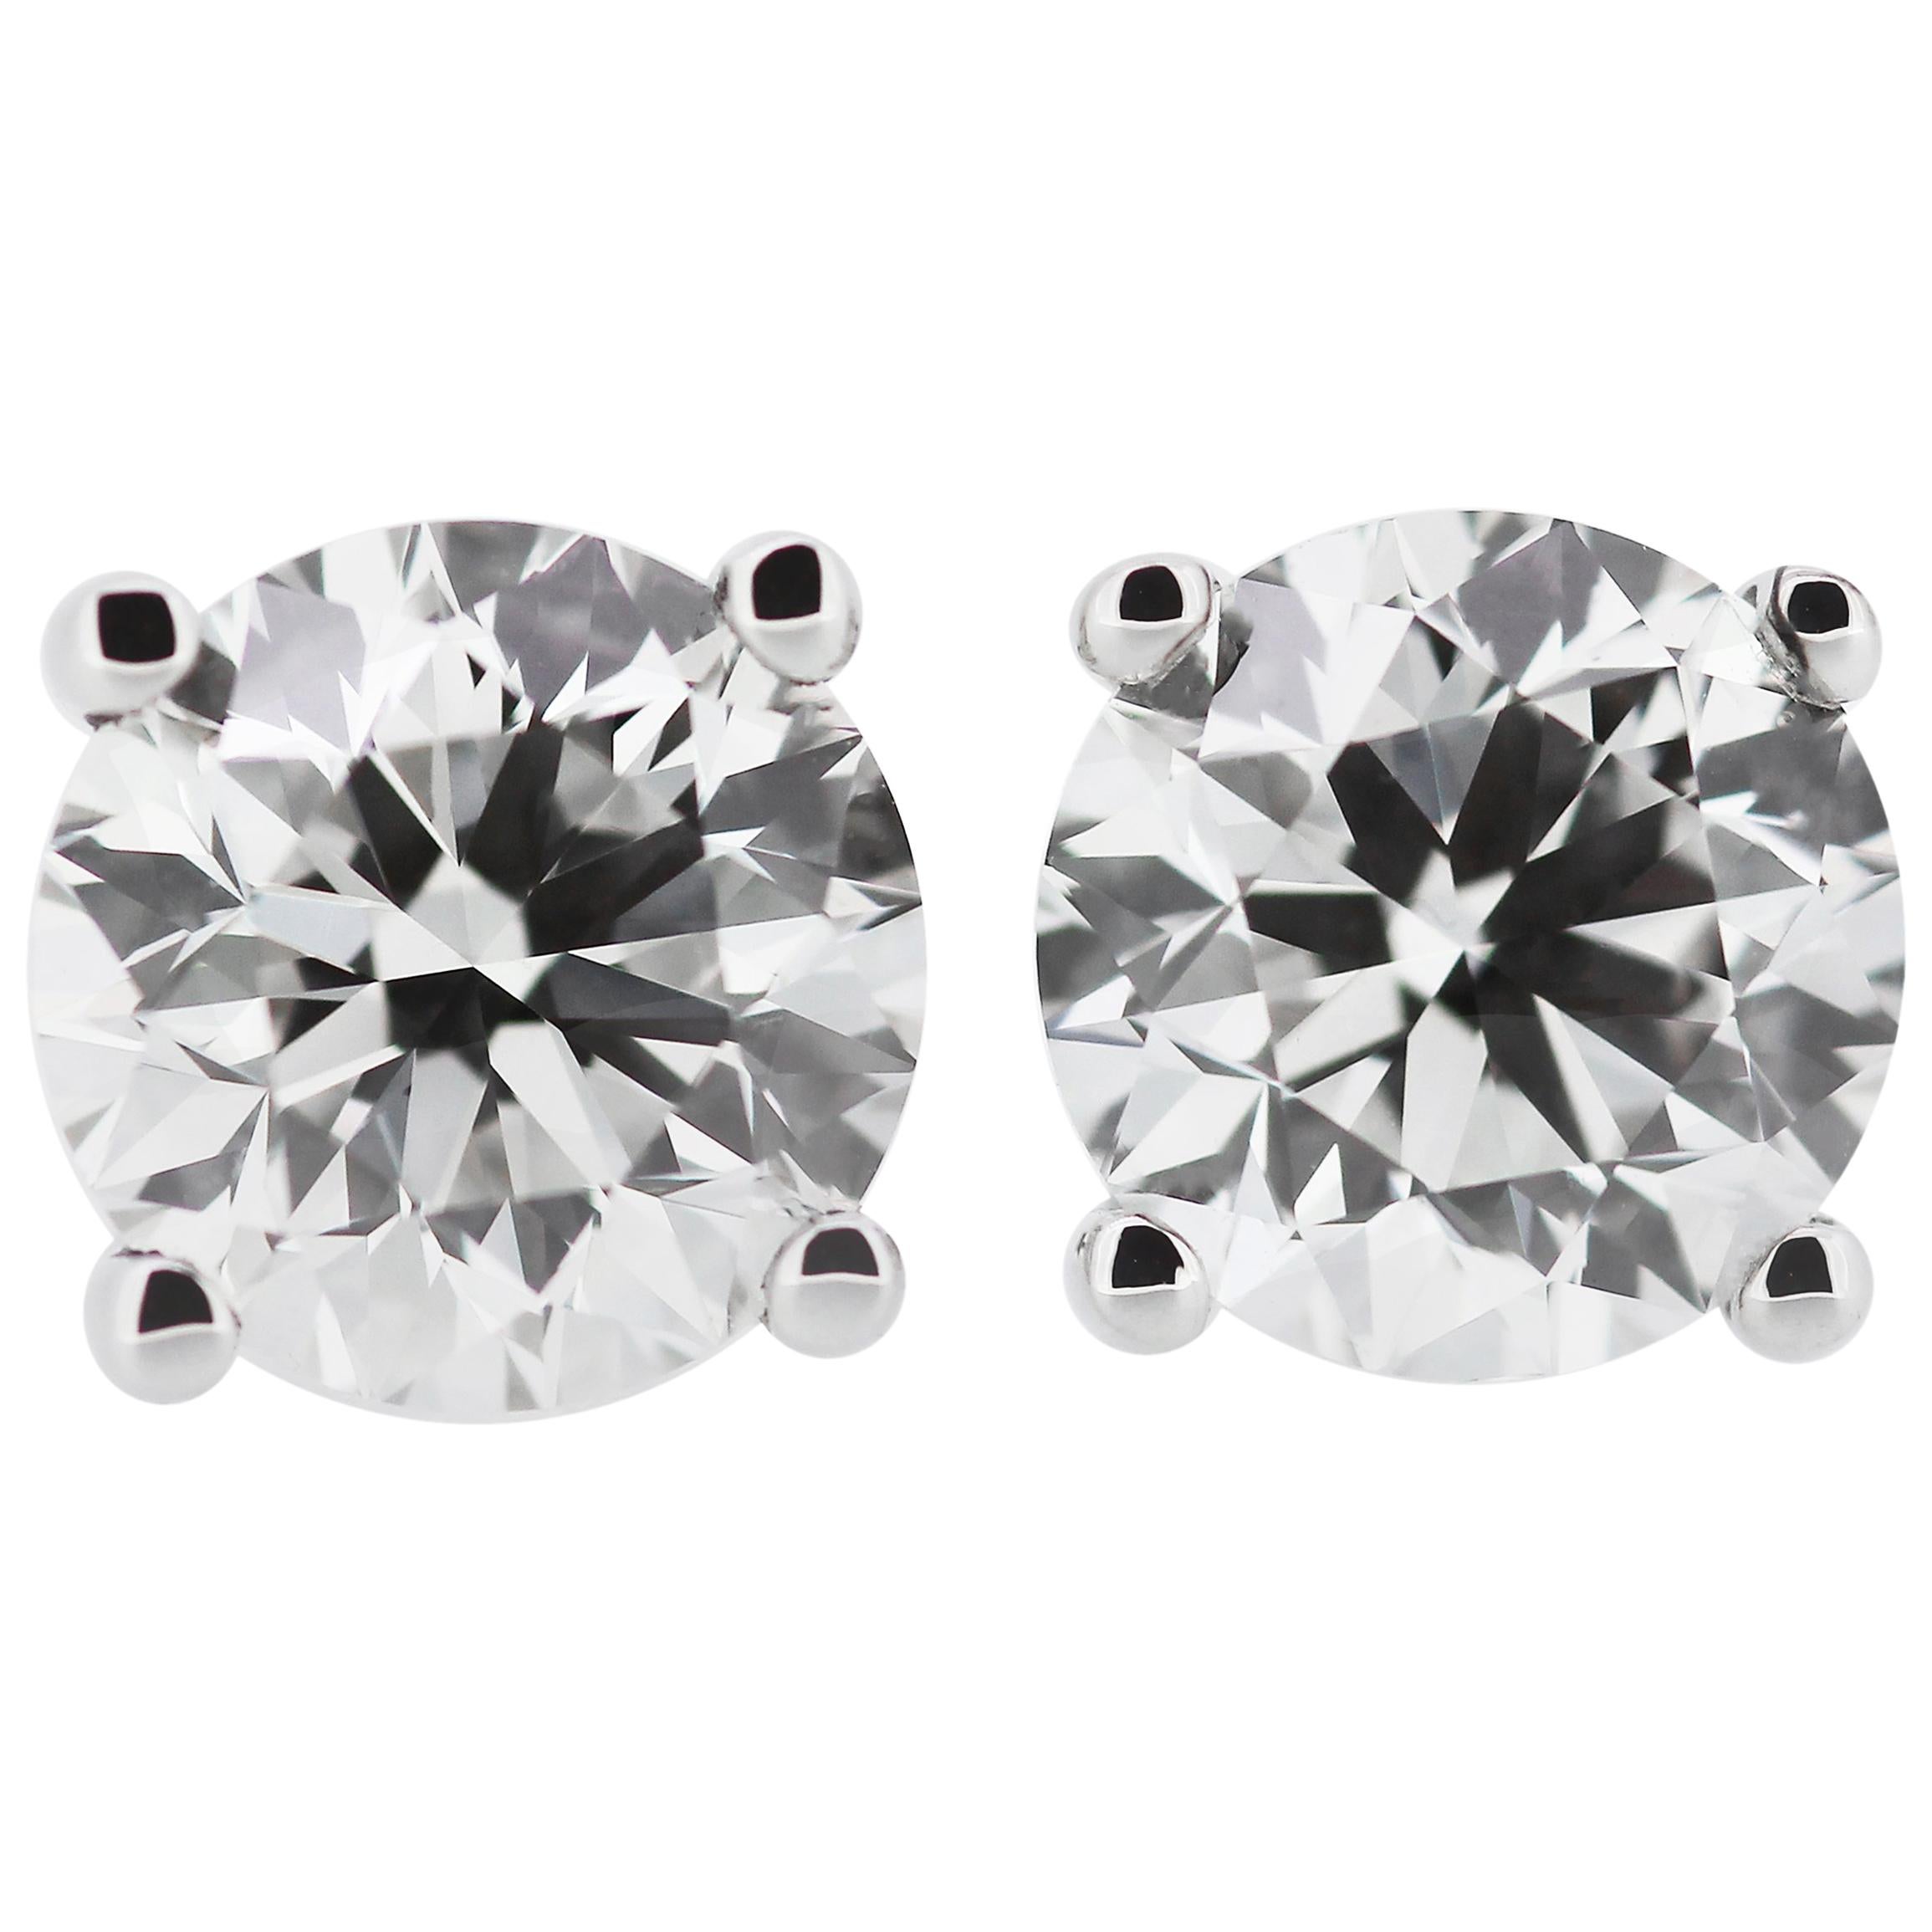 GIA Certified Round Diamond 4.0ct F VS2 Single Stone/Solitaire Stud Earrings 